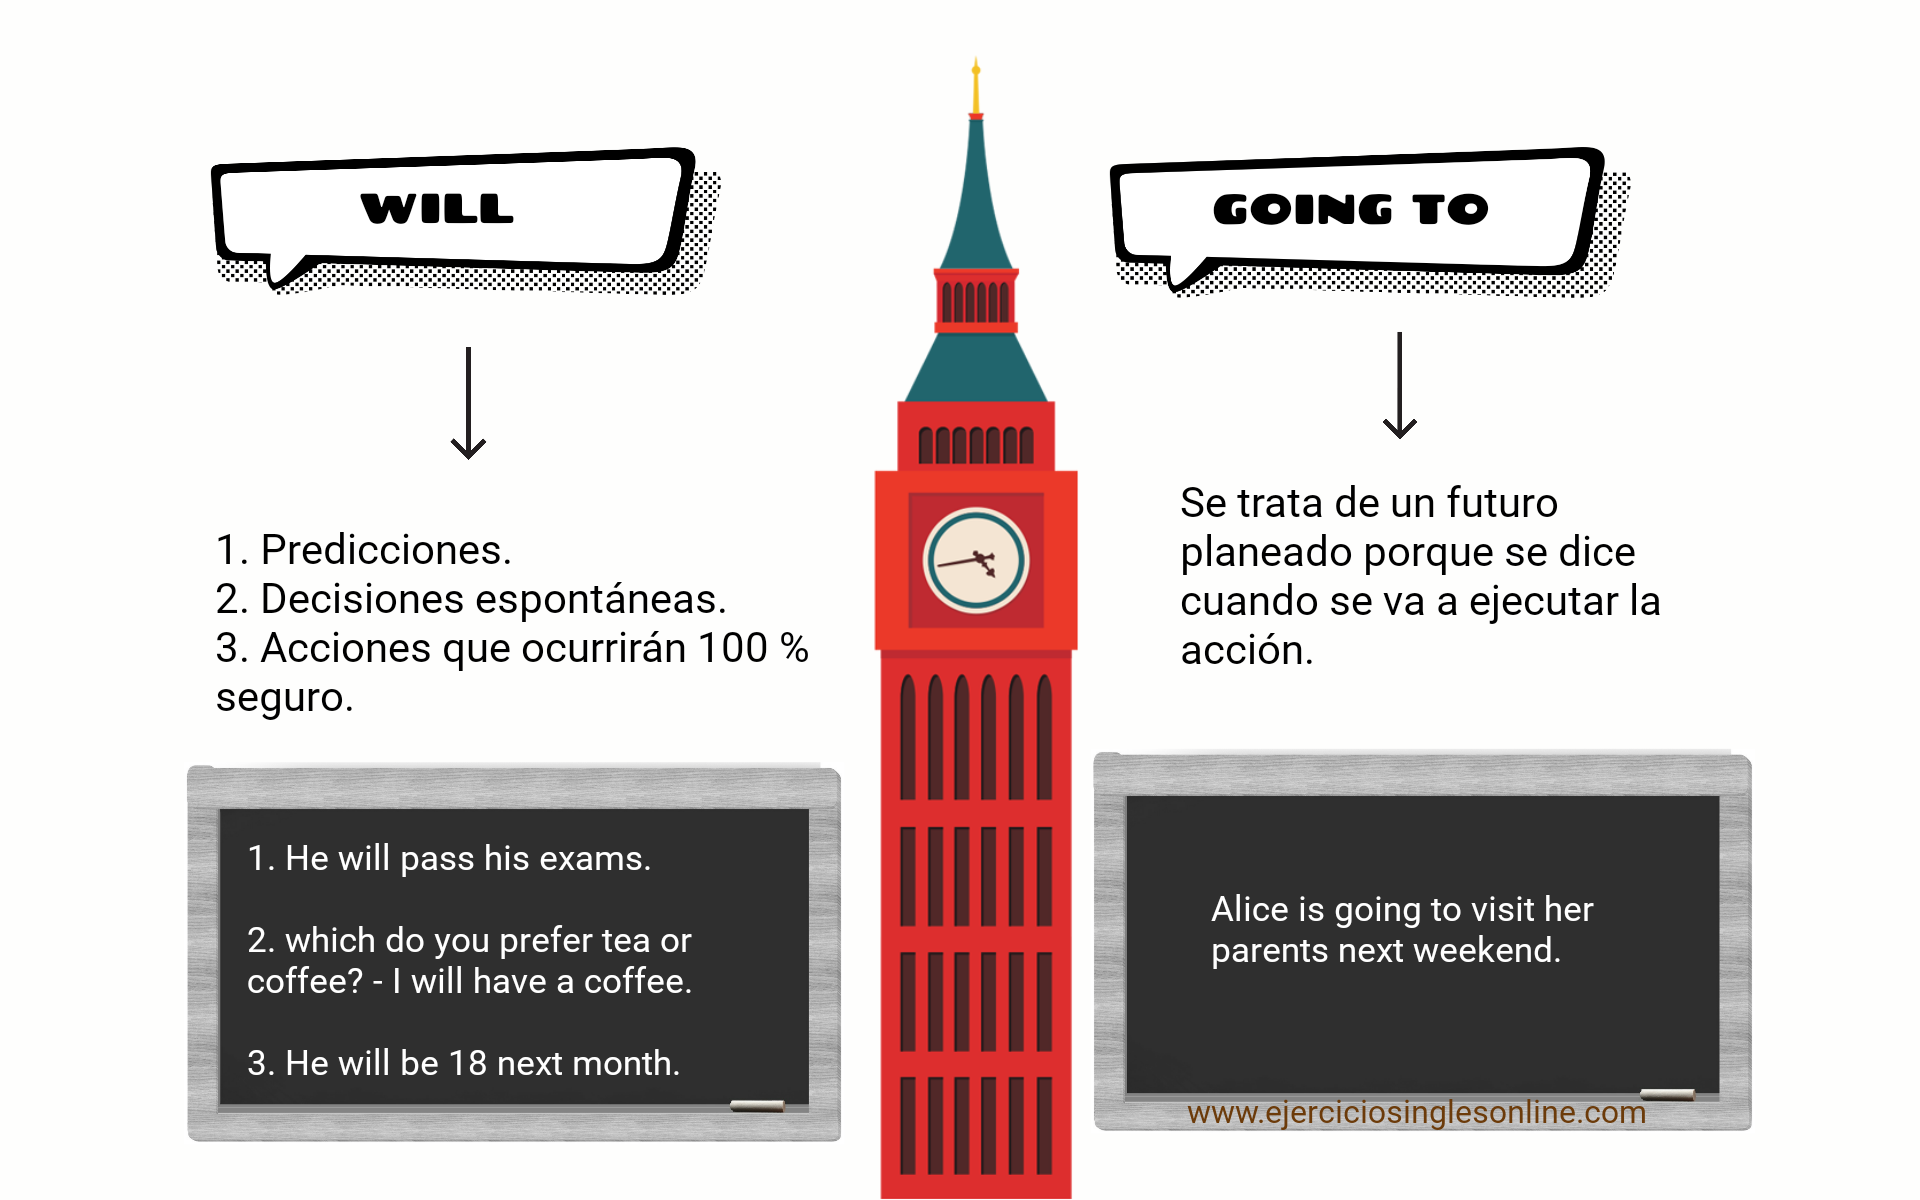 Will vs Going to - Ejercicio 6